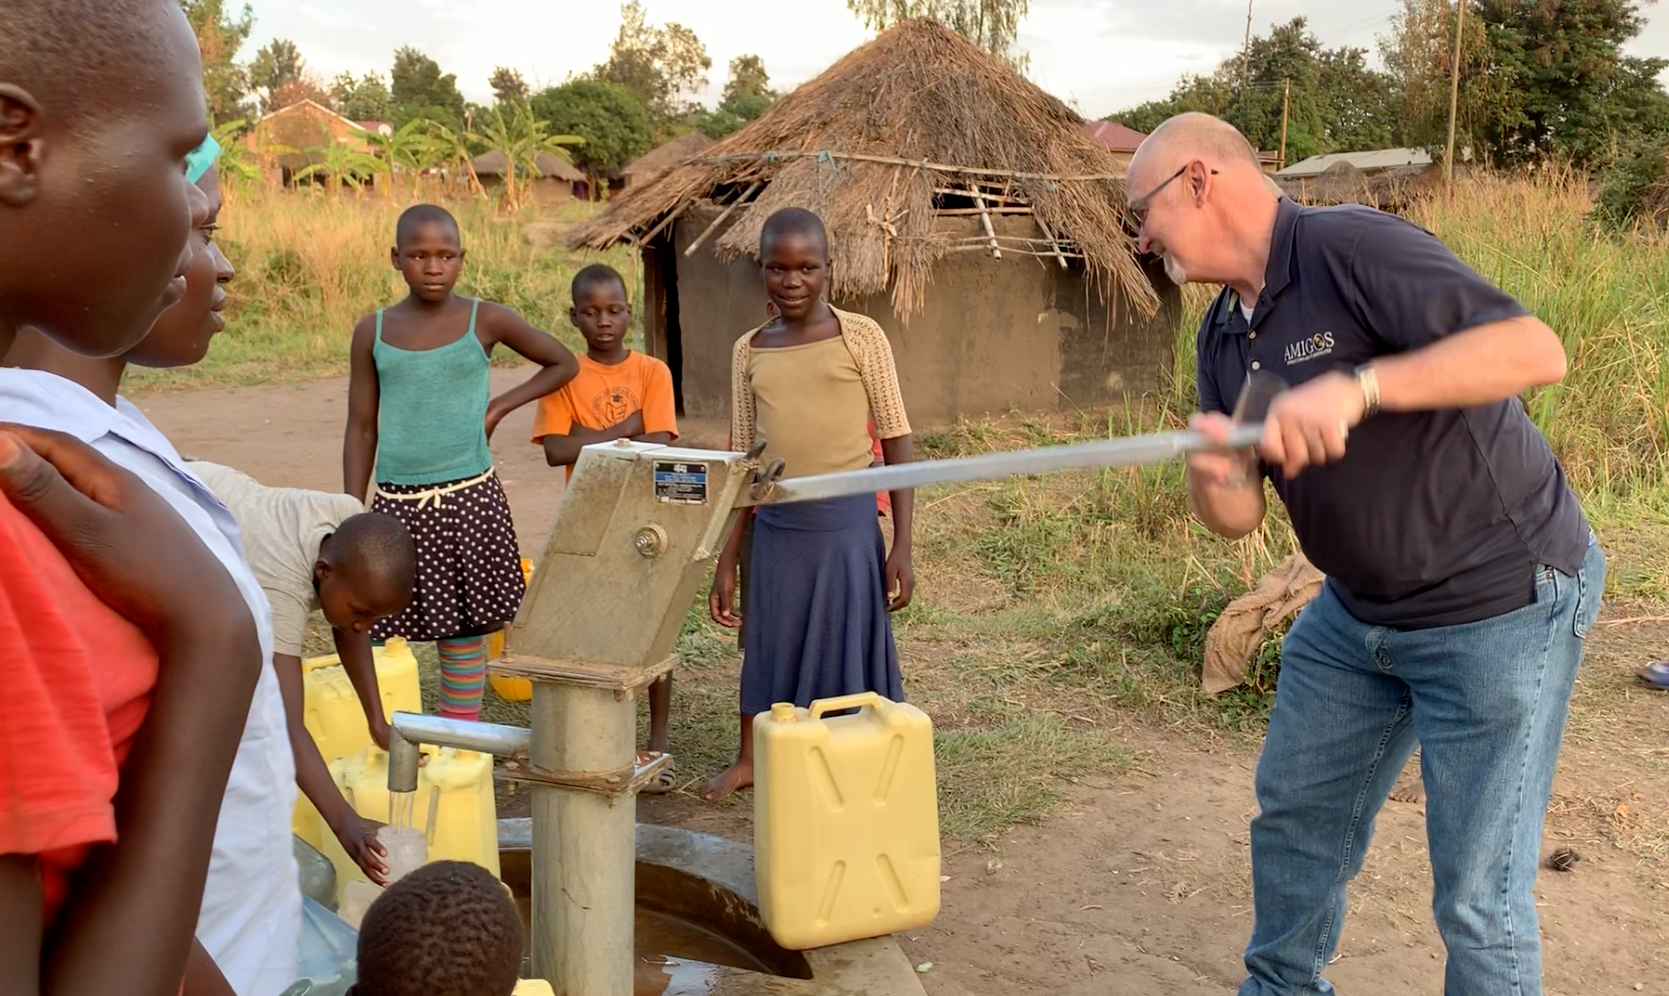 Michael Ryer pumping fresh clean water from a well Amigos just drilled